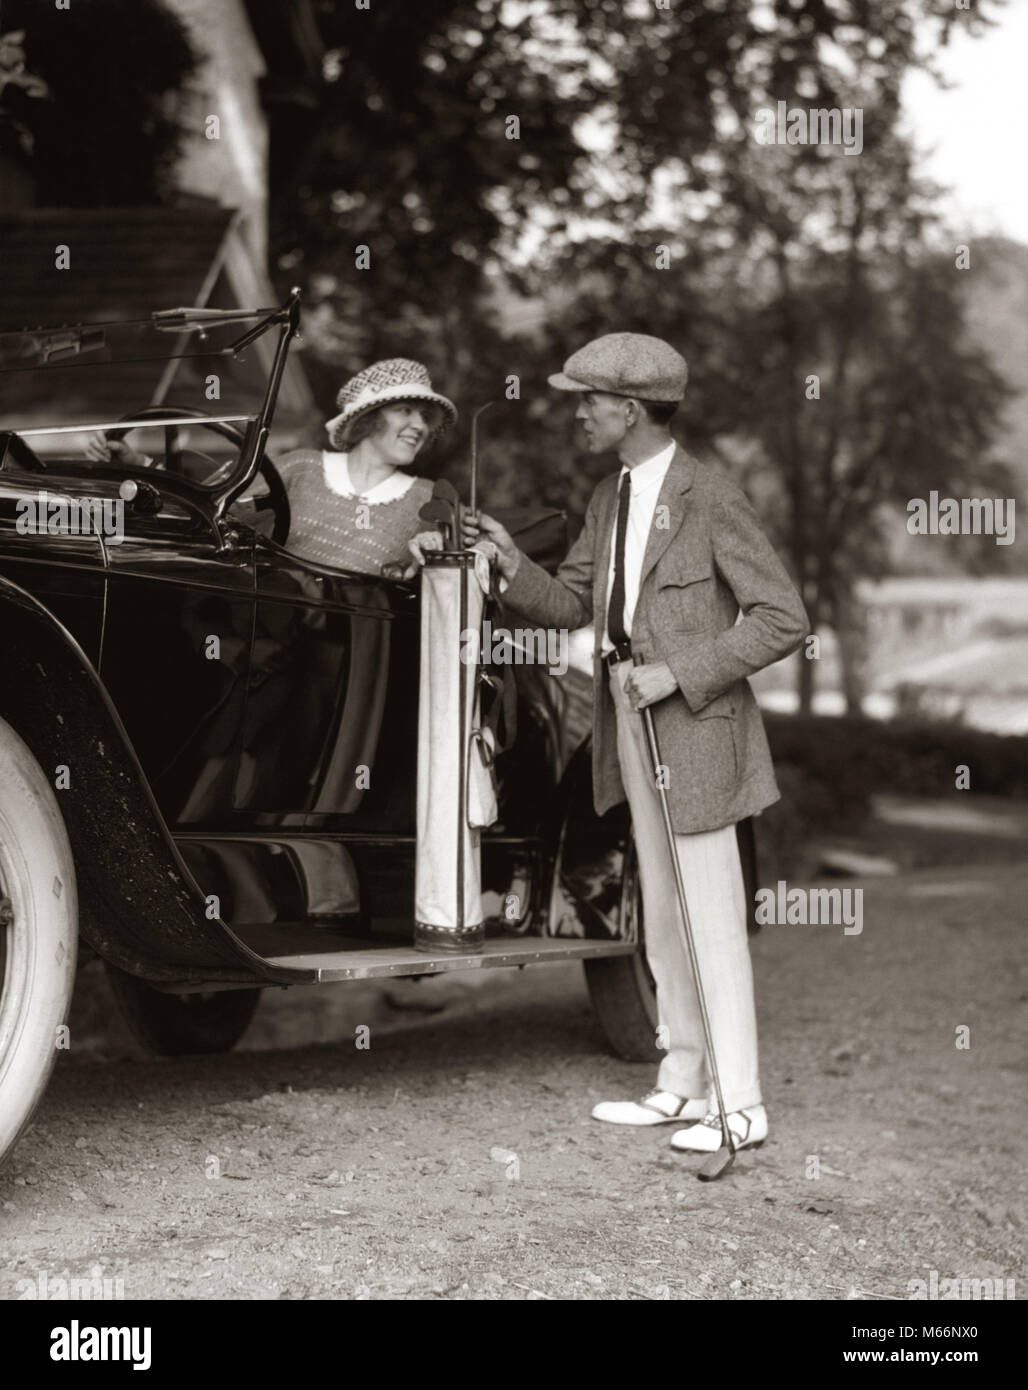 1920s COUPLE WOMAN MAN RESTING GOLF CLUBS BAG ON 1922 LINCOLN CONVERTIBLE RUNNING BOARD UPSCALE COUNTRY CLUB GOLFING LIFESTYLE - m130 HAR001 HARS RUN NOSTALGIC PAIR ROMANCE BEAUTY STYLISH SUBURBAN GOLFER OLD TIME BUSY LINCOLN RUNNER OLD FASHION AUTO FITNESS STYLE VEHICLE SAFETY TEAMWORK TWO PEOPLE CAUCASIAN ATHLETE FIT PLEASED JOY LIFESTYLE SATISFACTION FEMALES HUSBANDS GROWNUP HEALTHINESS ATHLETICS TRANSPORT COPY SPACE FRIENDSHIP FULL-LENGTH LADIES INSPIRATION GROWN-UP AUTOMOBILE GOLFING ATHLETIC COUPLES CONFIDENCE TRANSPORTATION NOSTALGIA RESTING CLUBS TOGETHERNESS 25-30 YEARS 30-35 YEARS Stock Photo